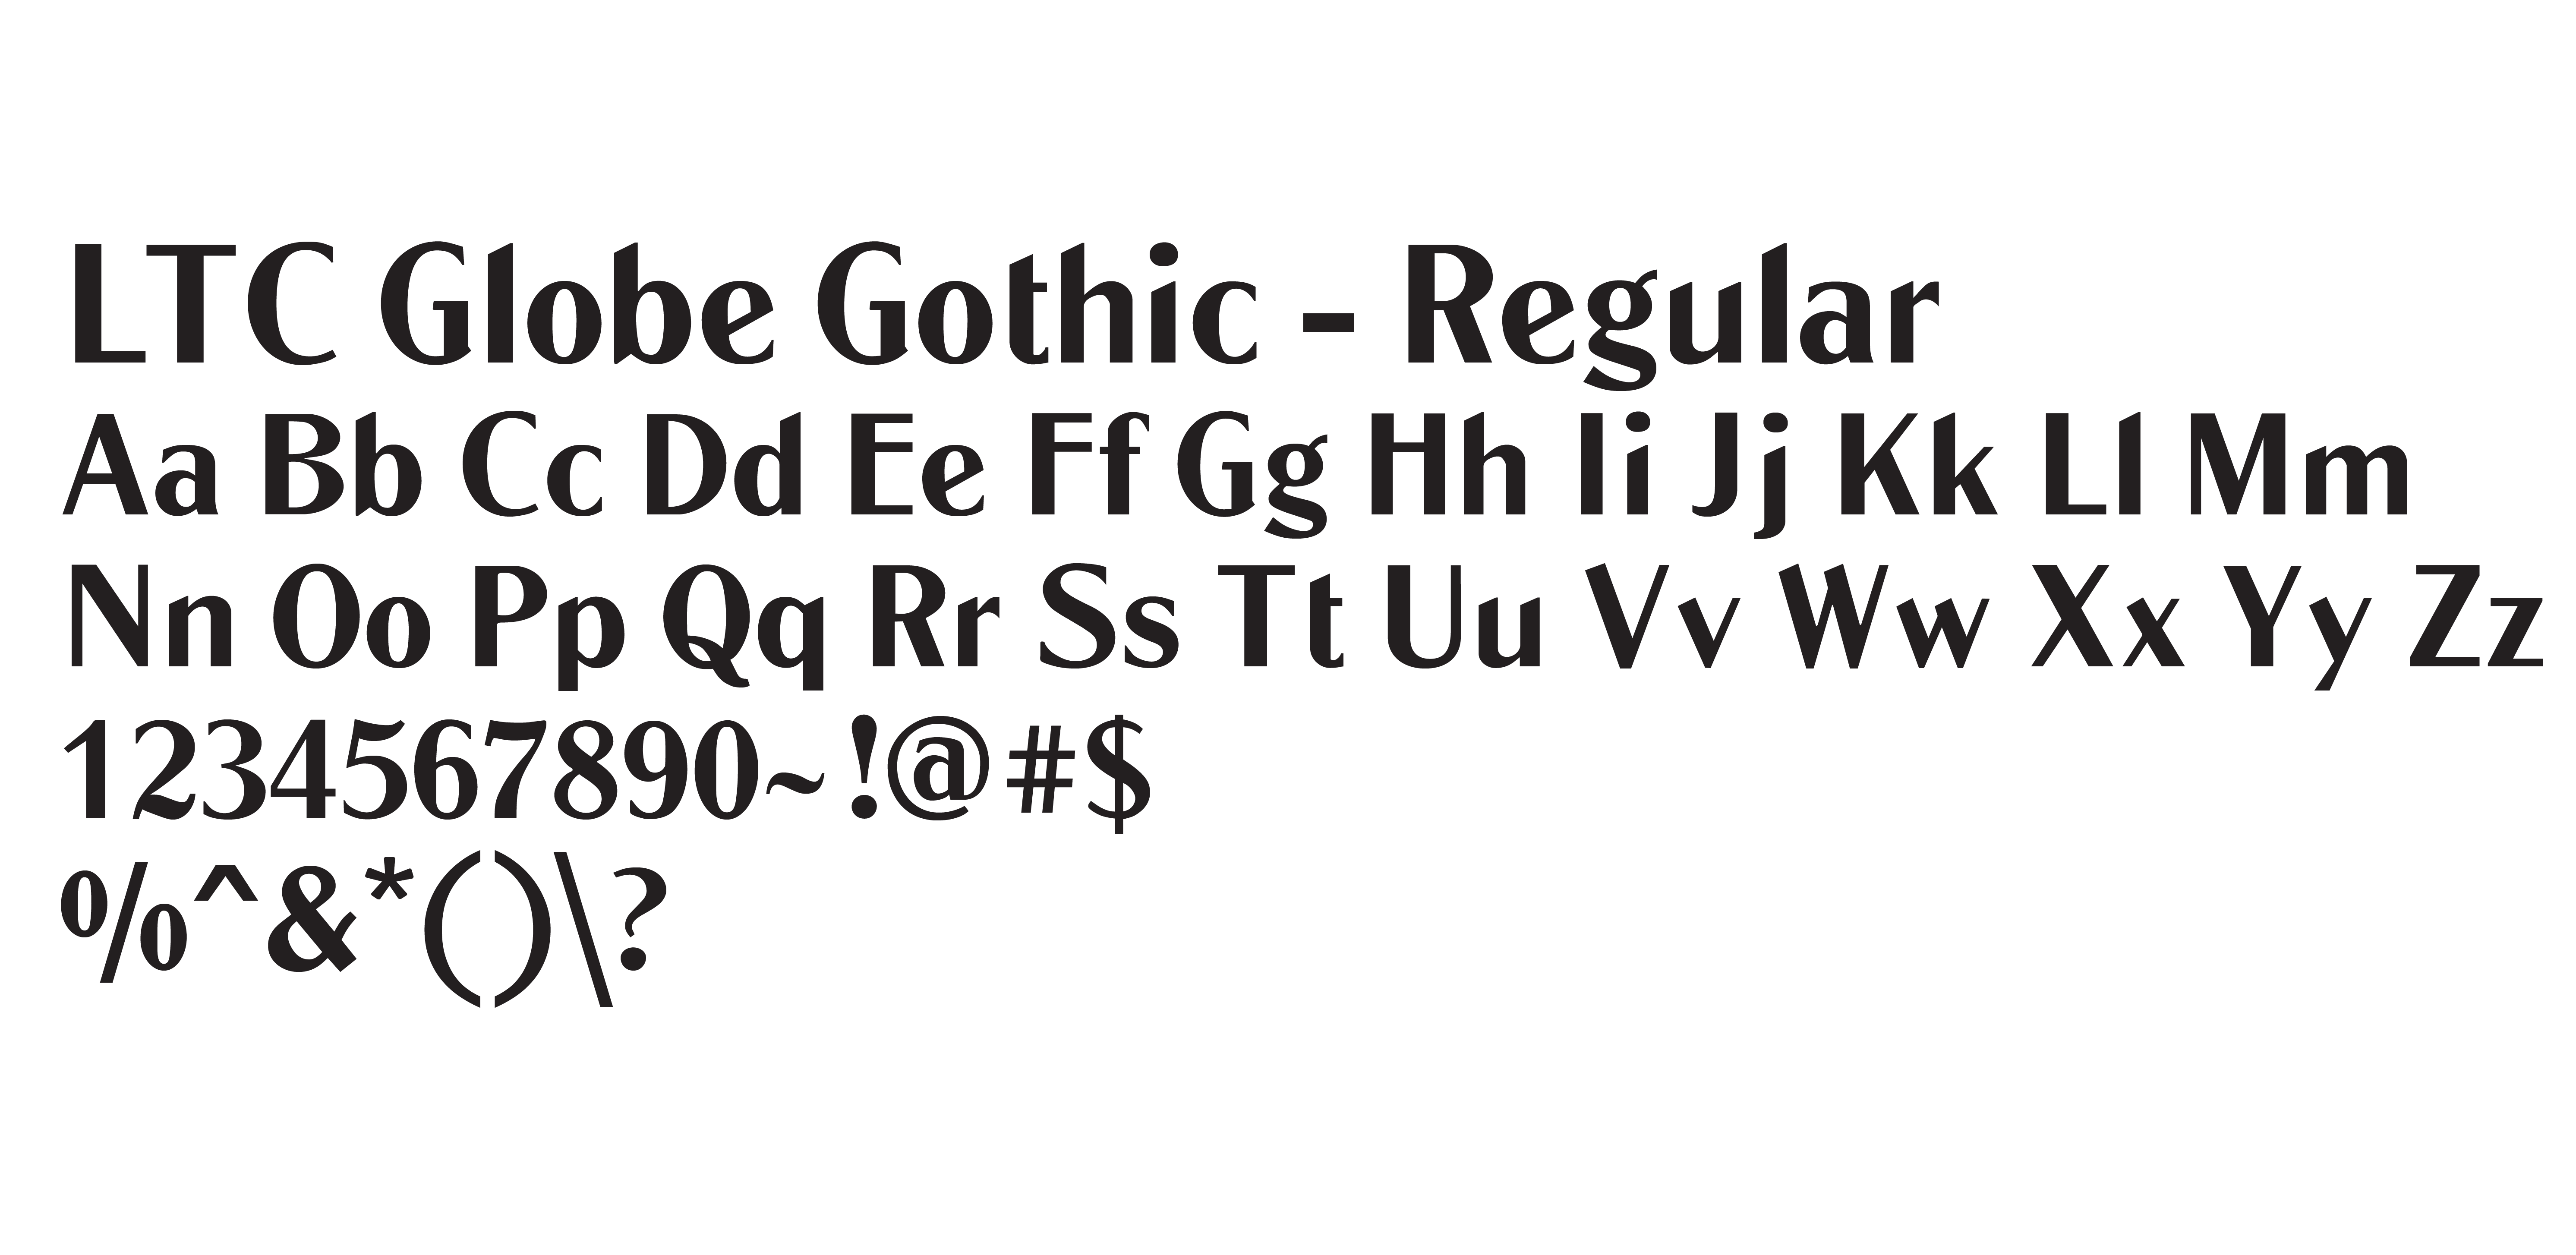 Type Study for The Definitive Guide to Kissing: LTC Globe Gothic Regular